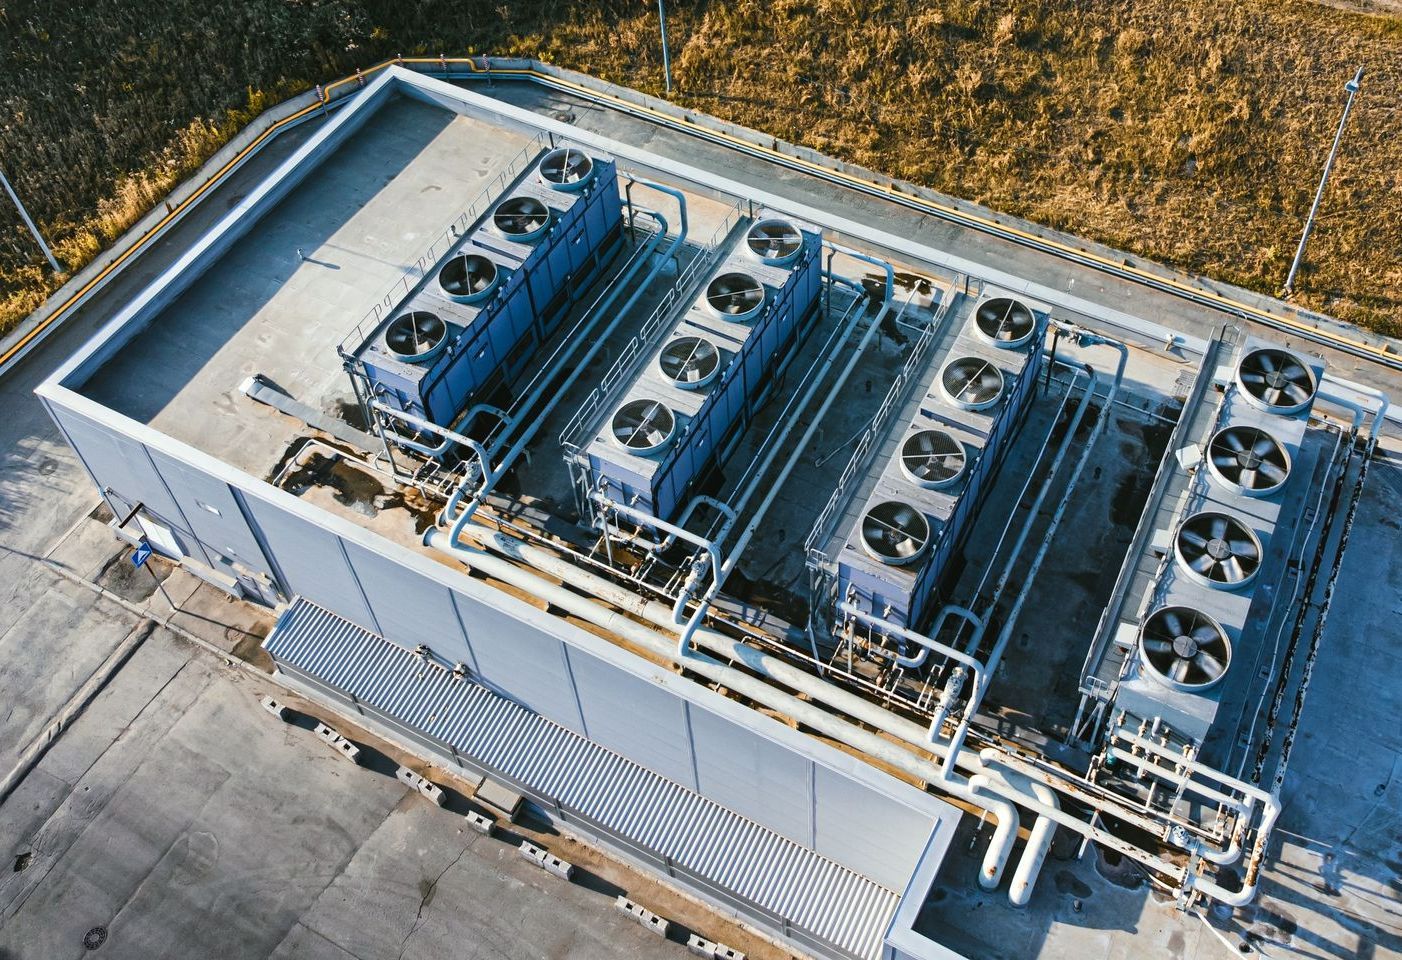 an aerial view of a large building with a lot of fans on the roof - HVAC building control